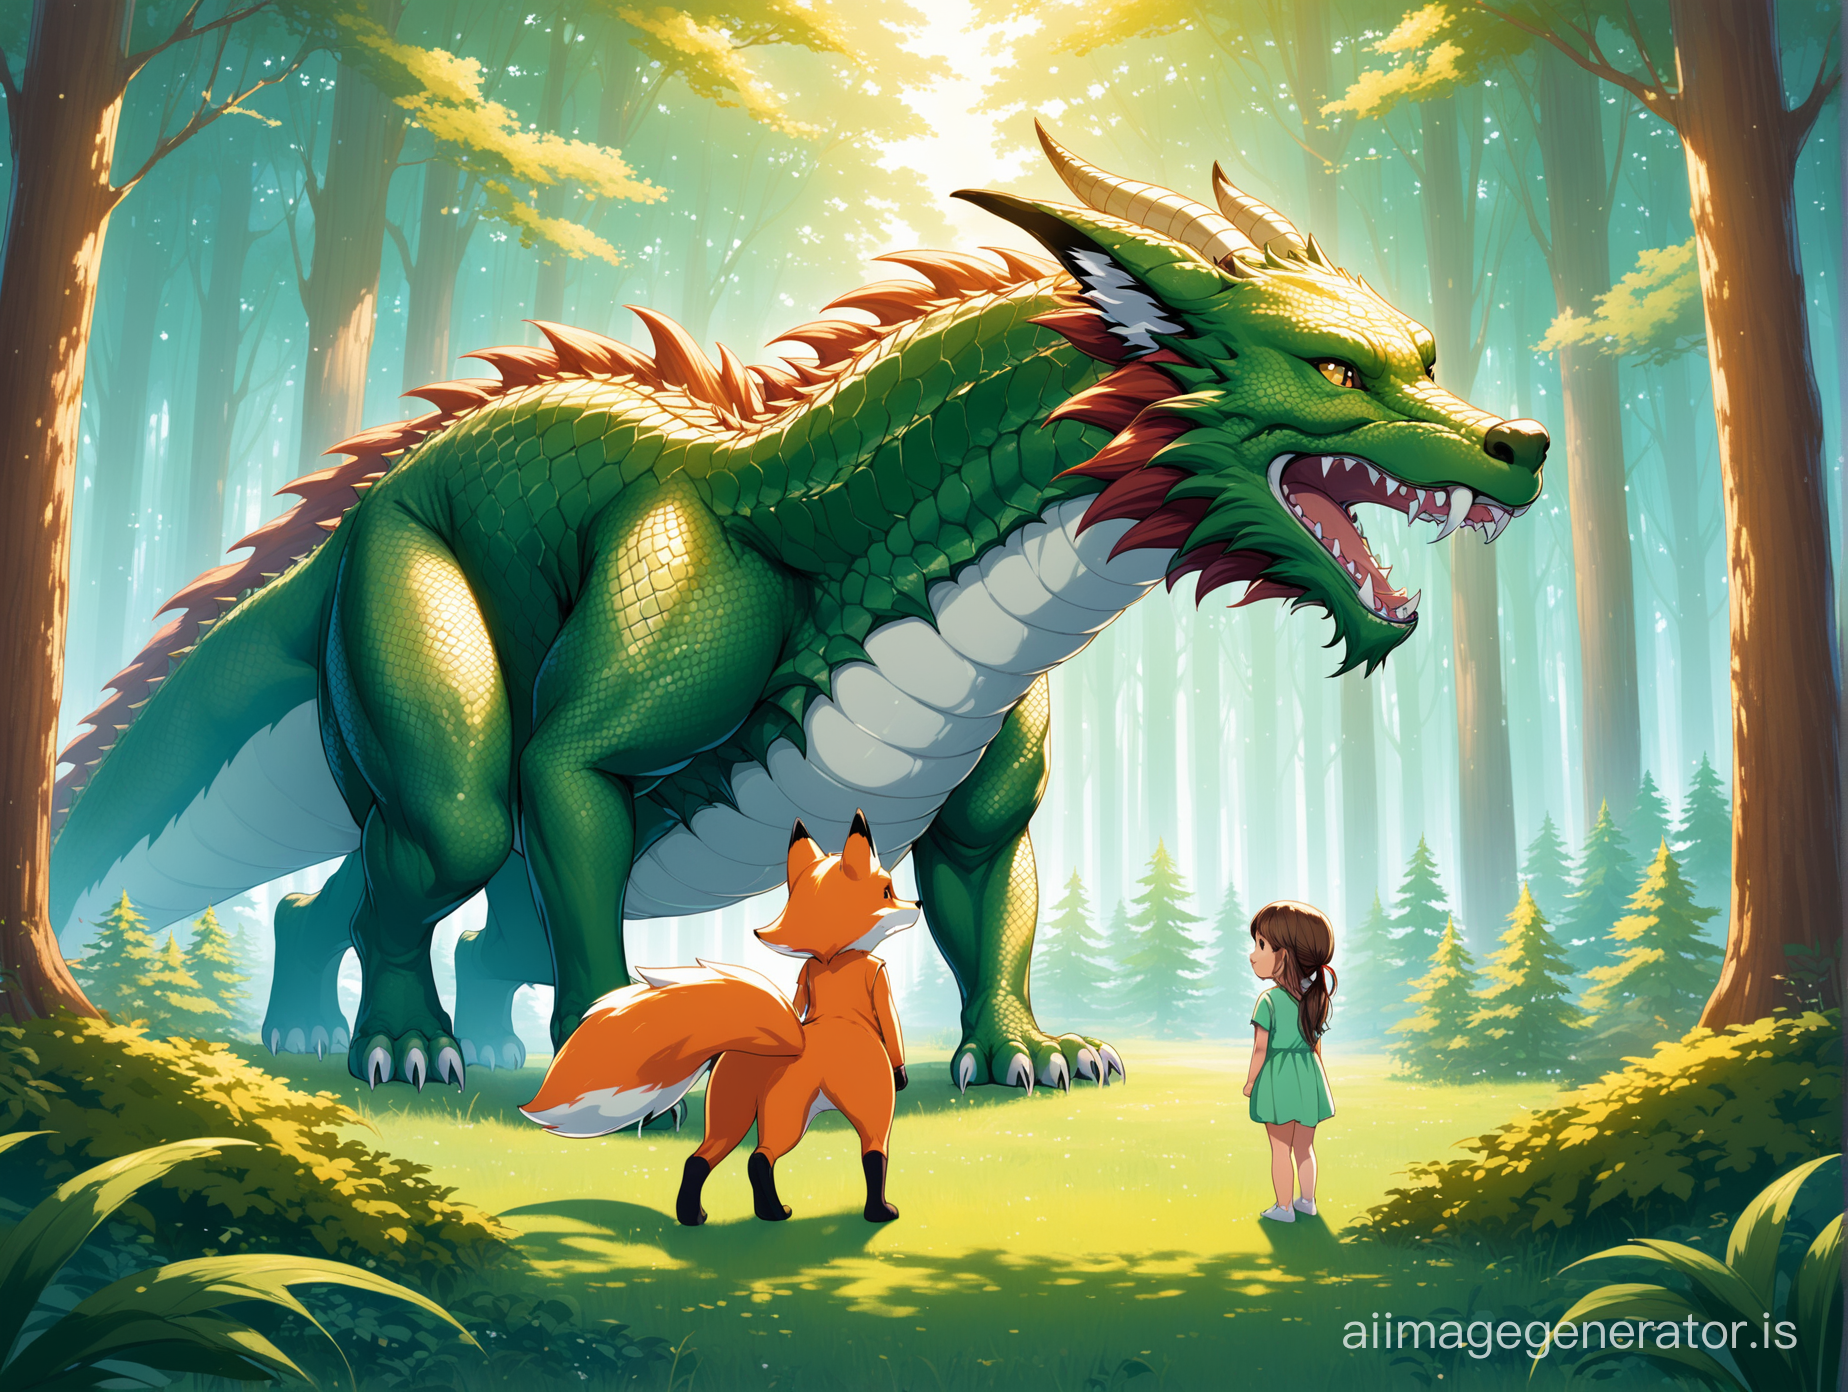 a little girl and a fox standing in front of a big dragon in the forest
